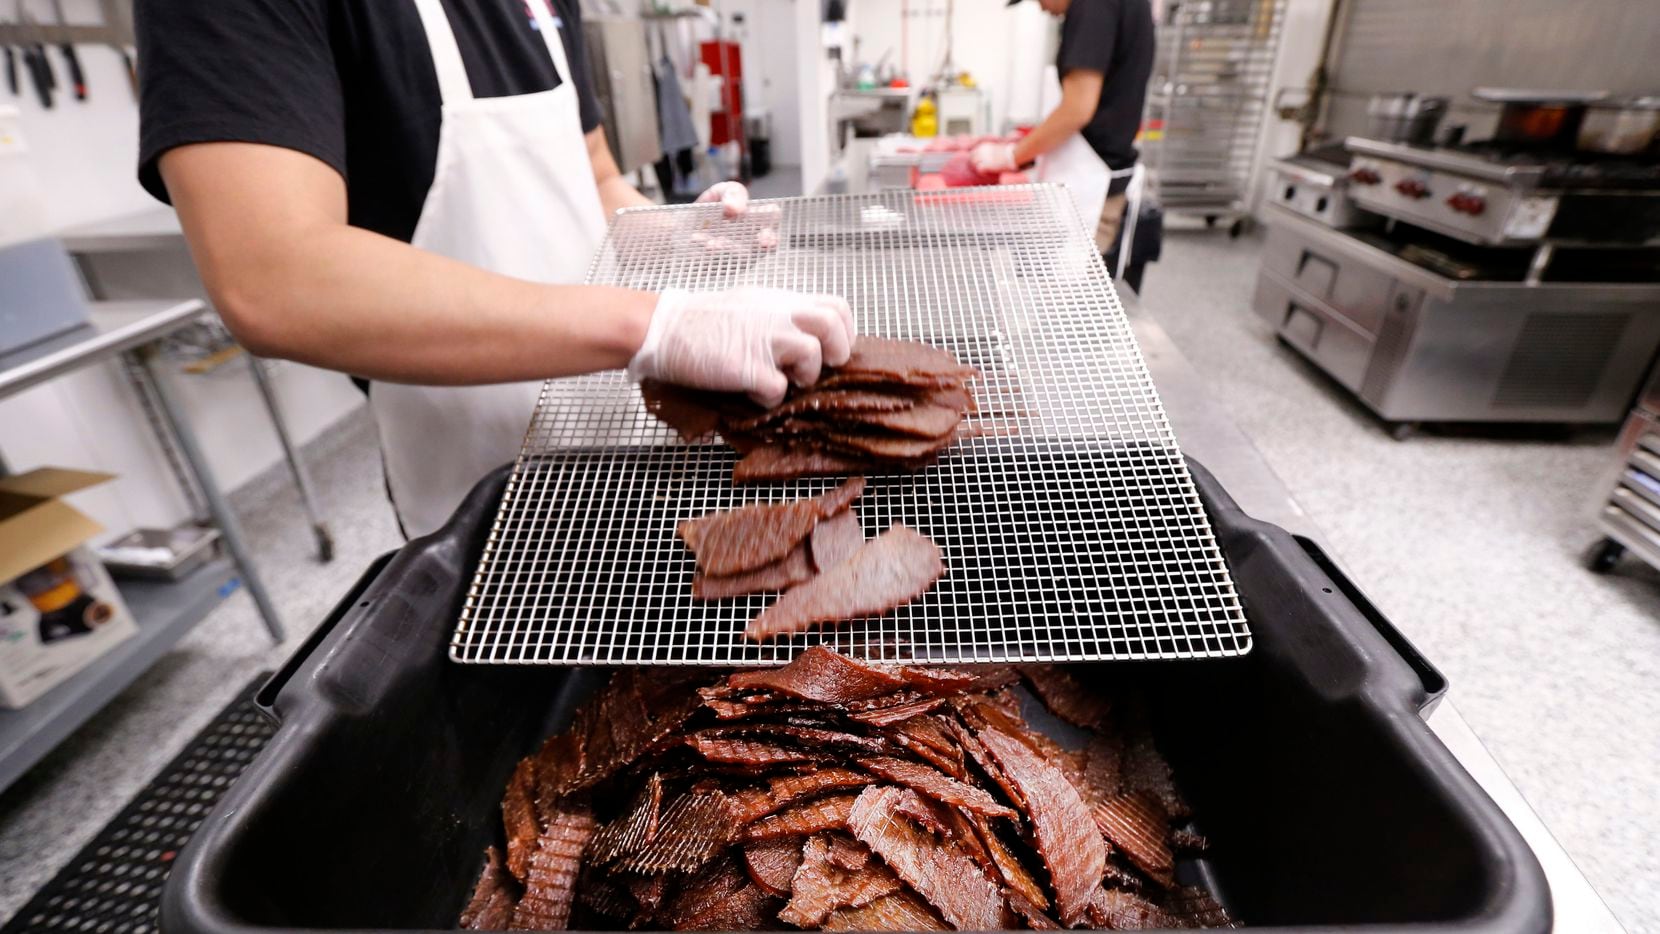 Frick Chanthorn removes warm beef jerky slices from the dehydration unit and piles them into...